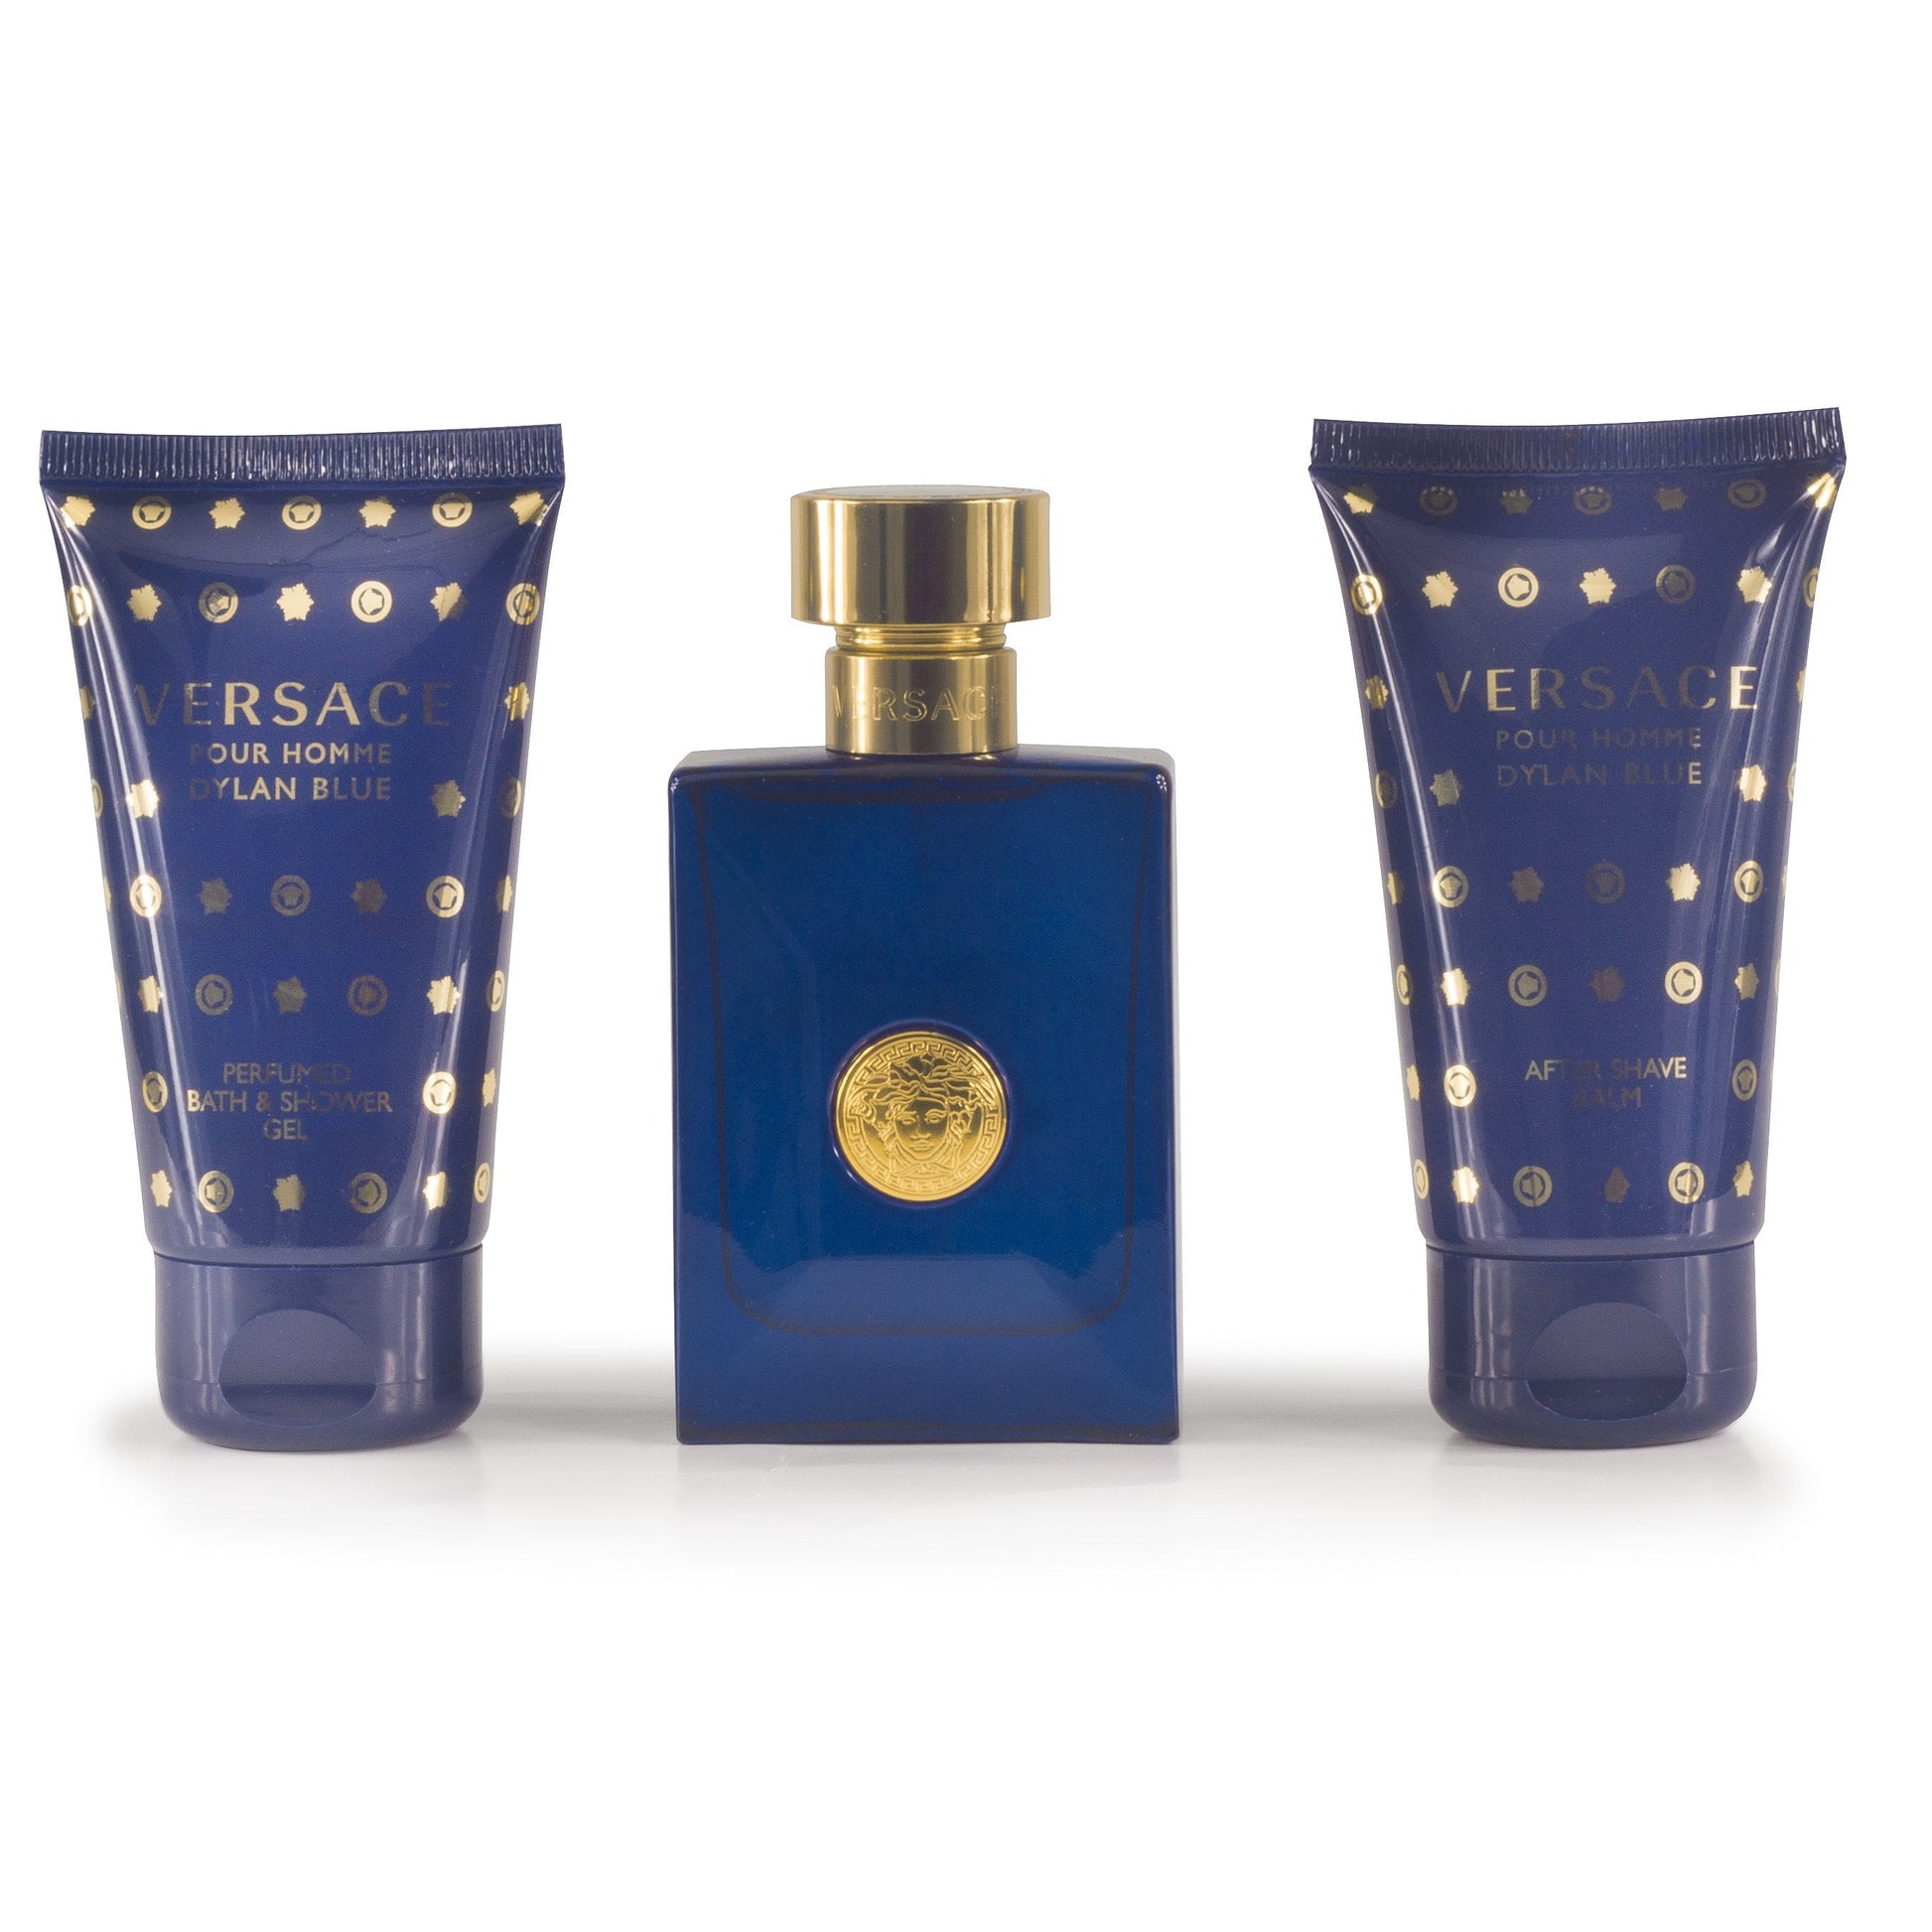 Dylan Blue Set for Men by Versace 1.7 oz. Click to open in modal